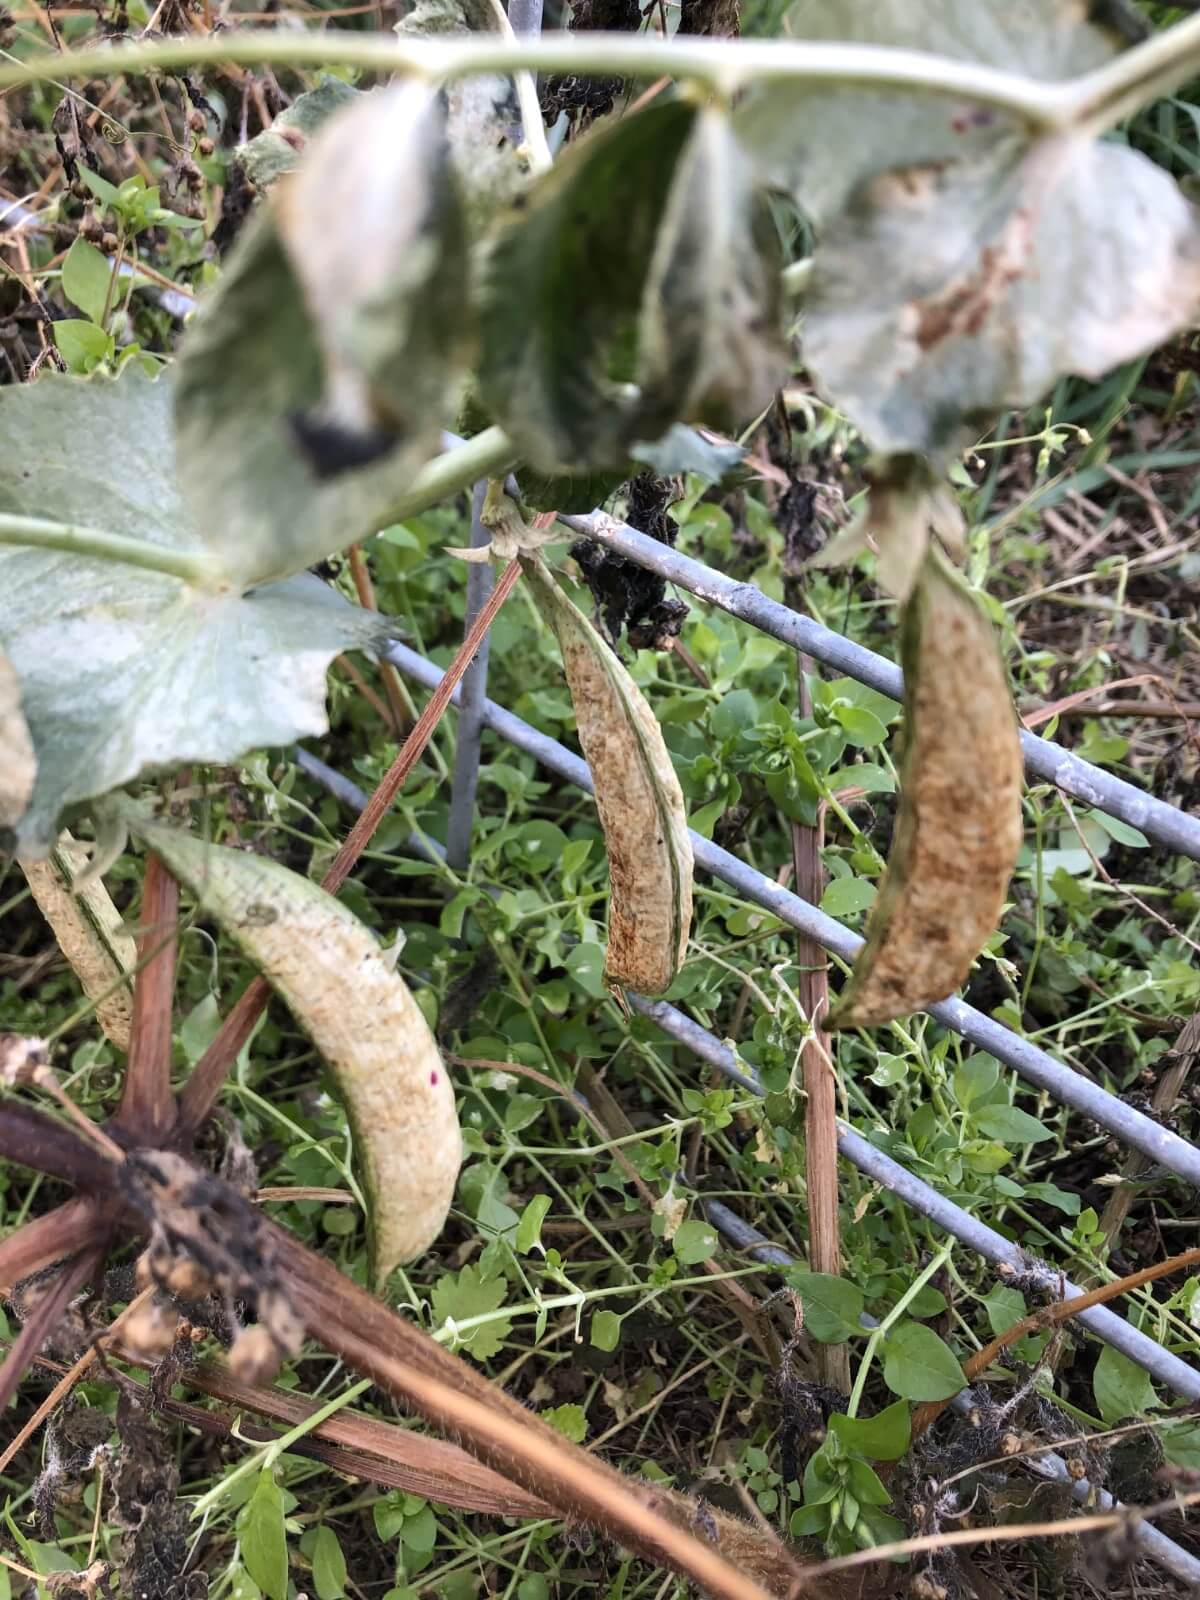 over-matured dried pods on pea plant